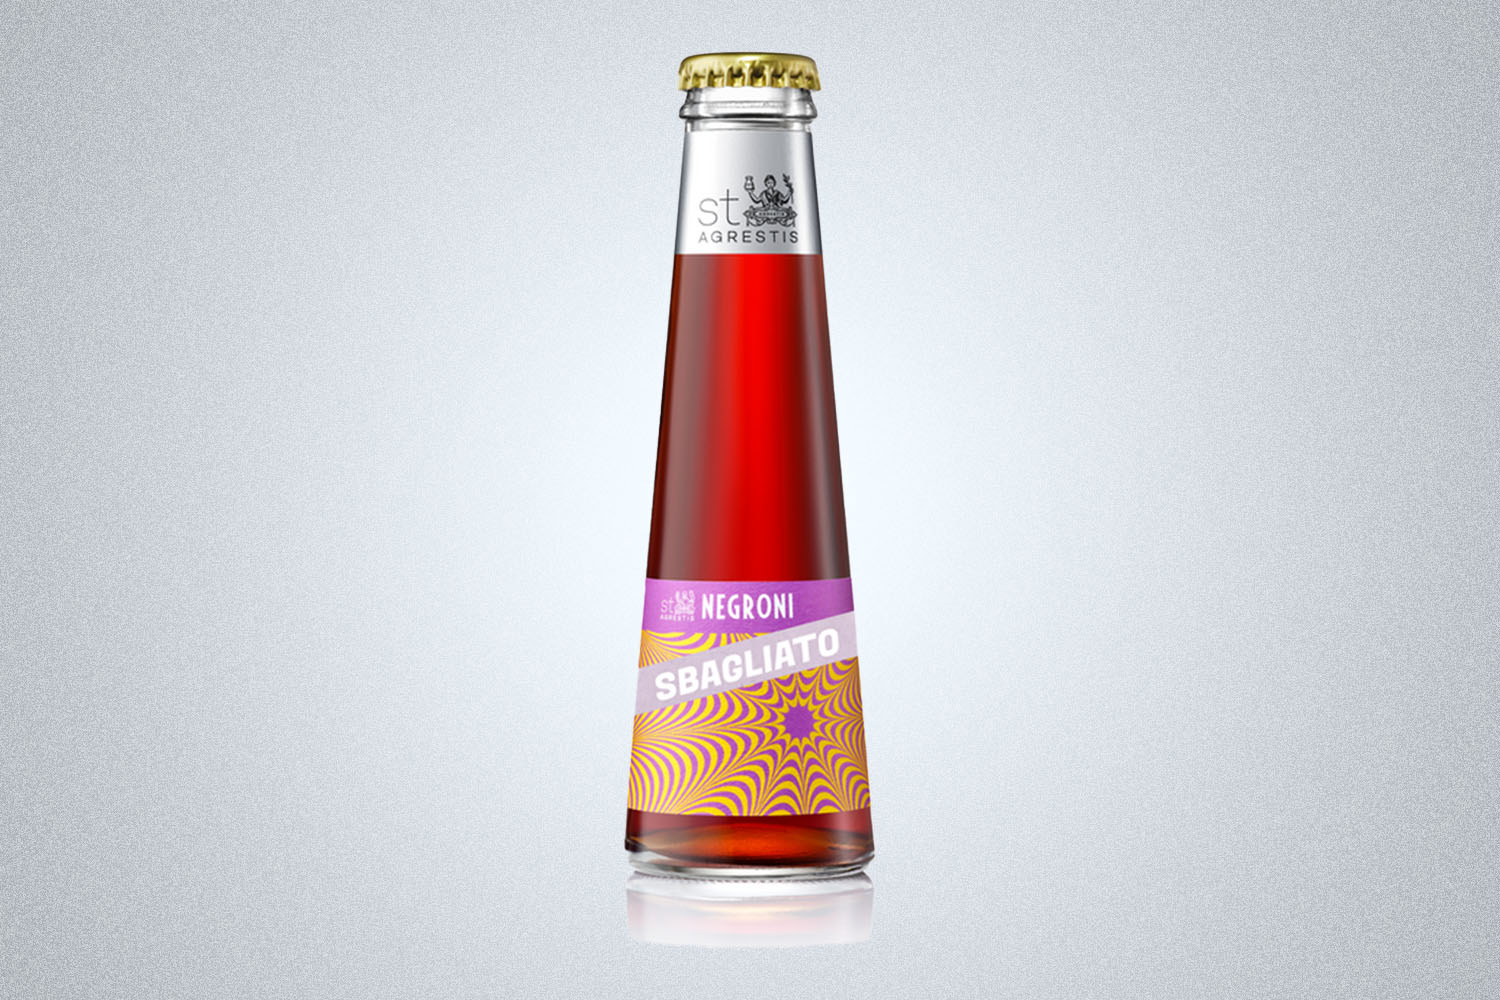 a bottle of St Agrestis Negroni Sbagliato on a grey background